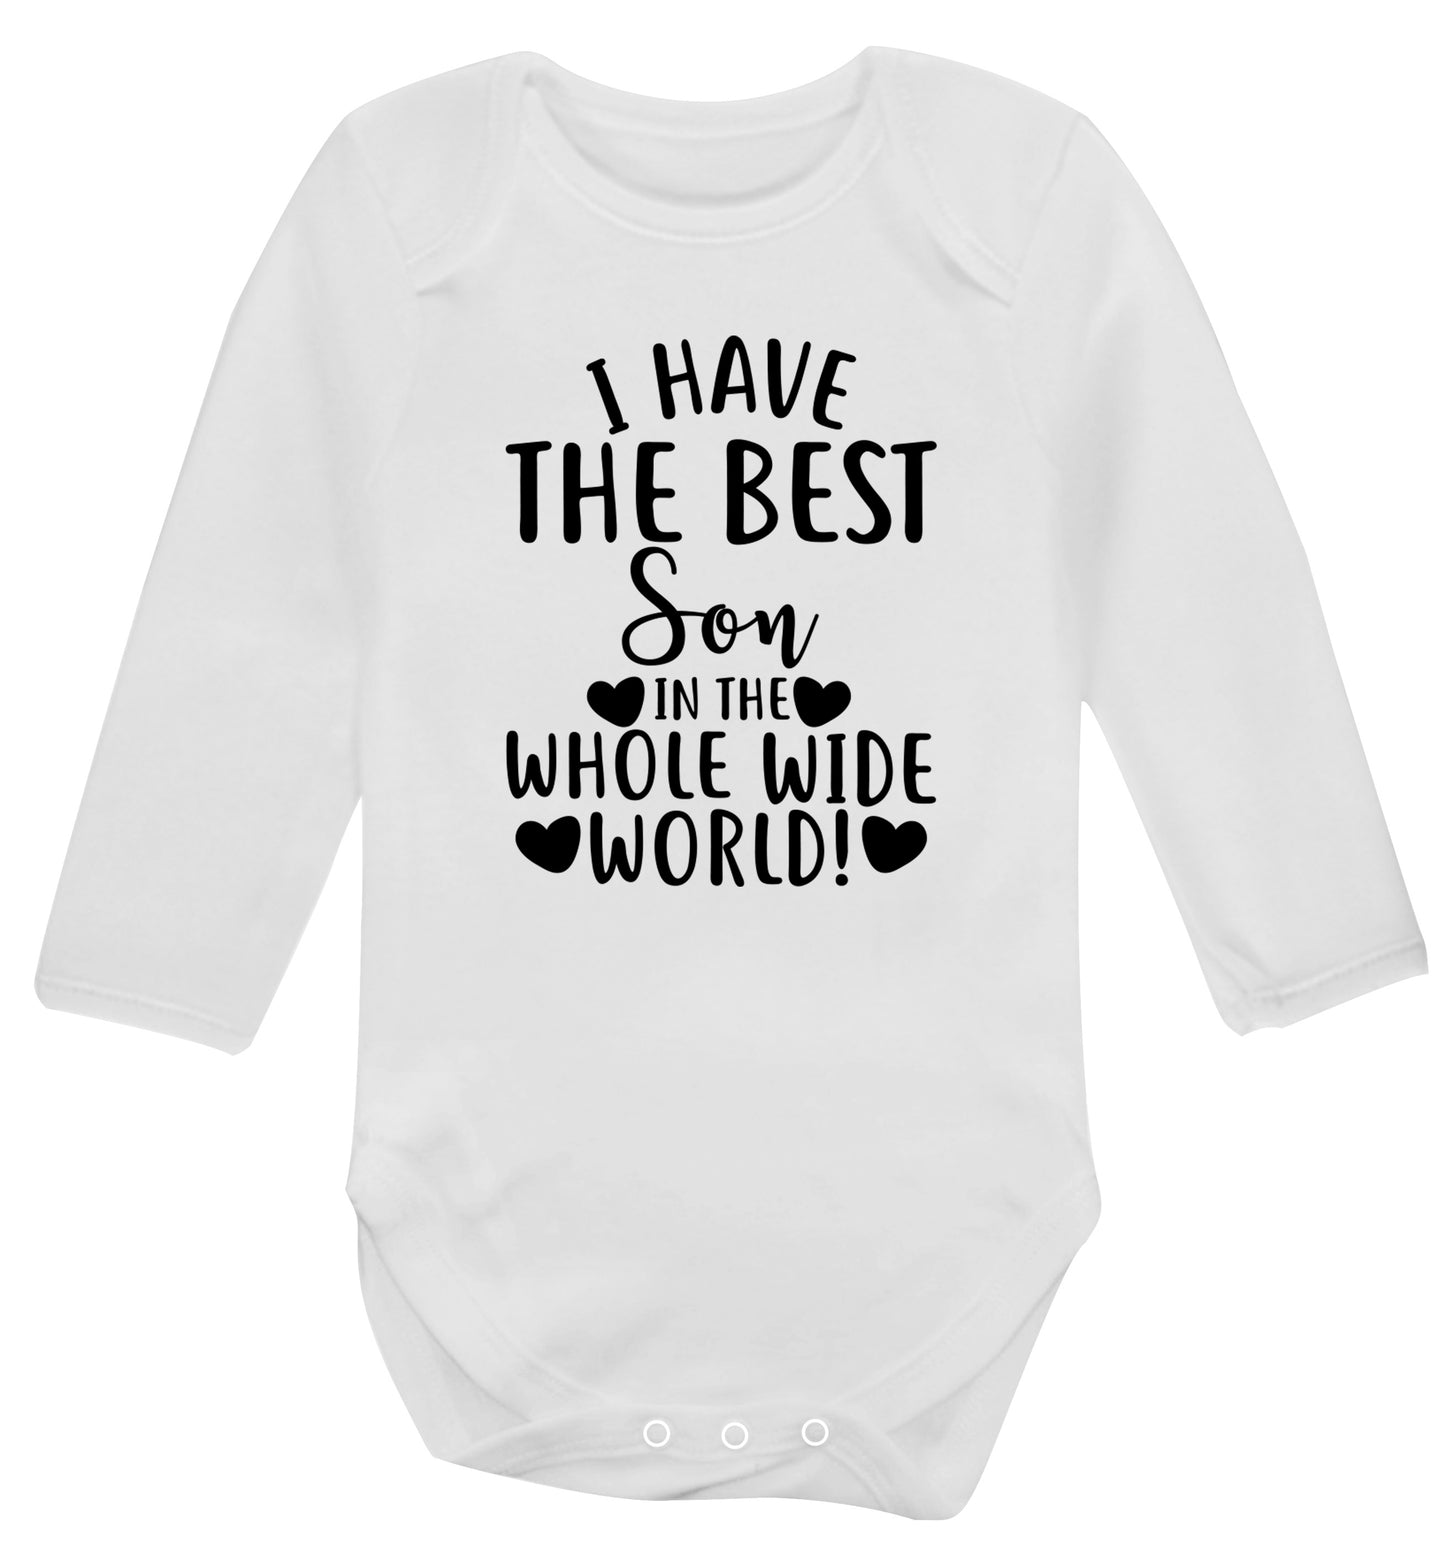 I have the best son in the whole wide world! Baby Vest long sleeved white 6-12 months